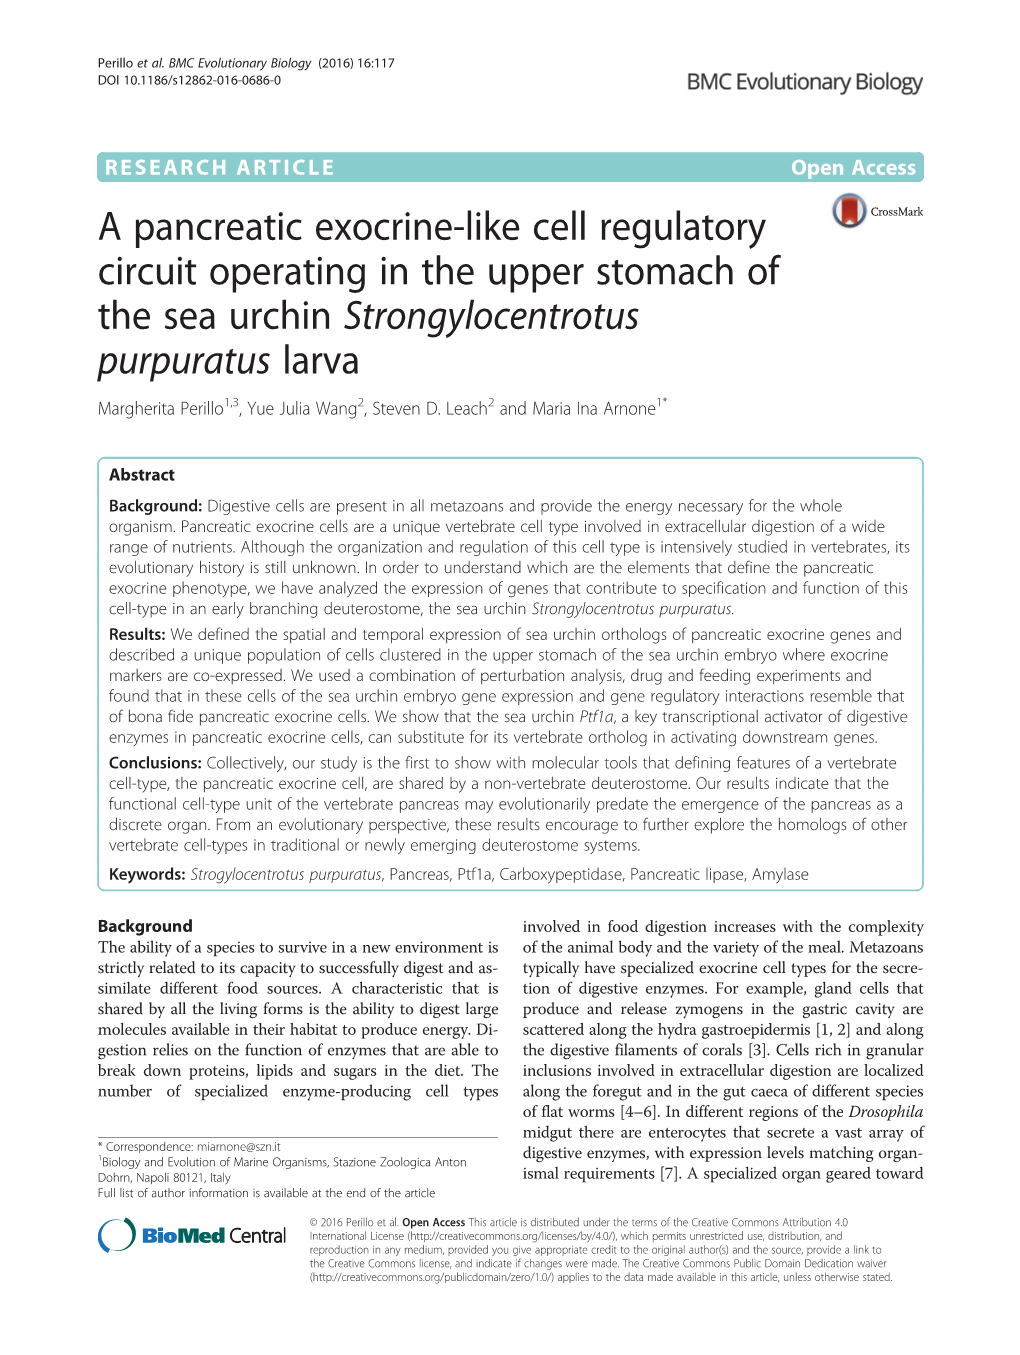 A Pancreatic Exocrine-Like Cell Regulatory Circuit Operating in The